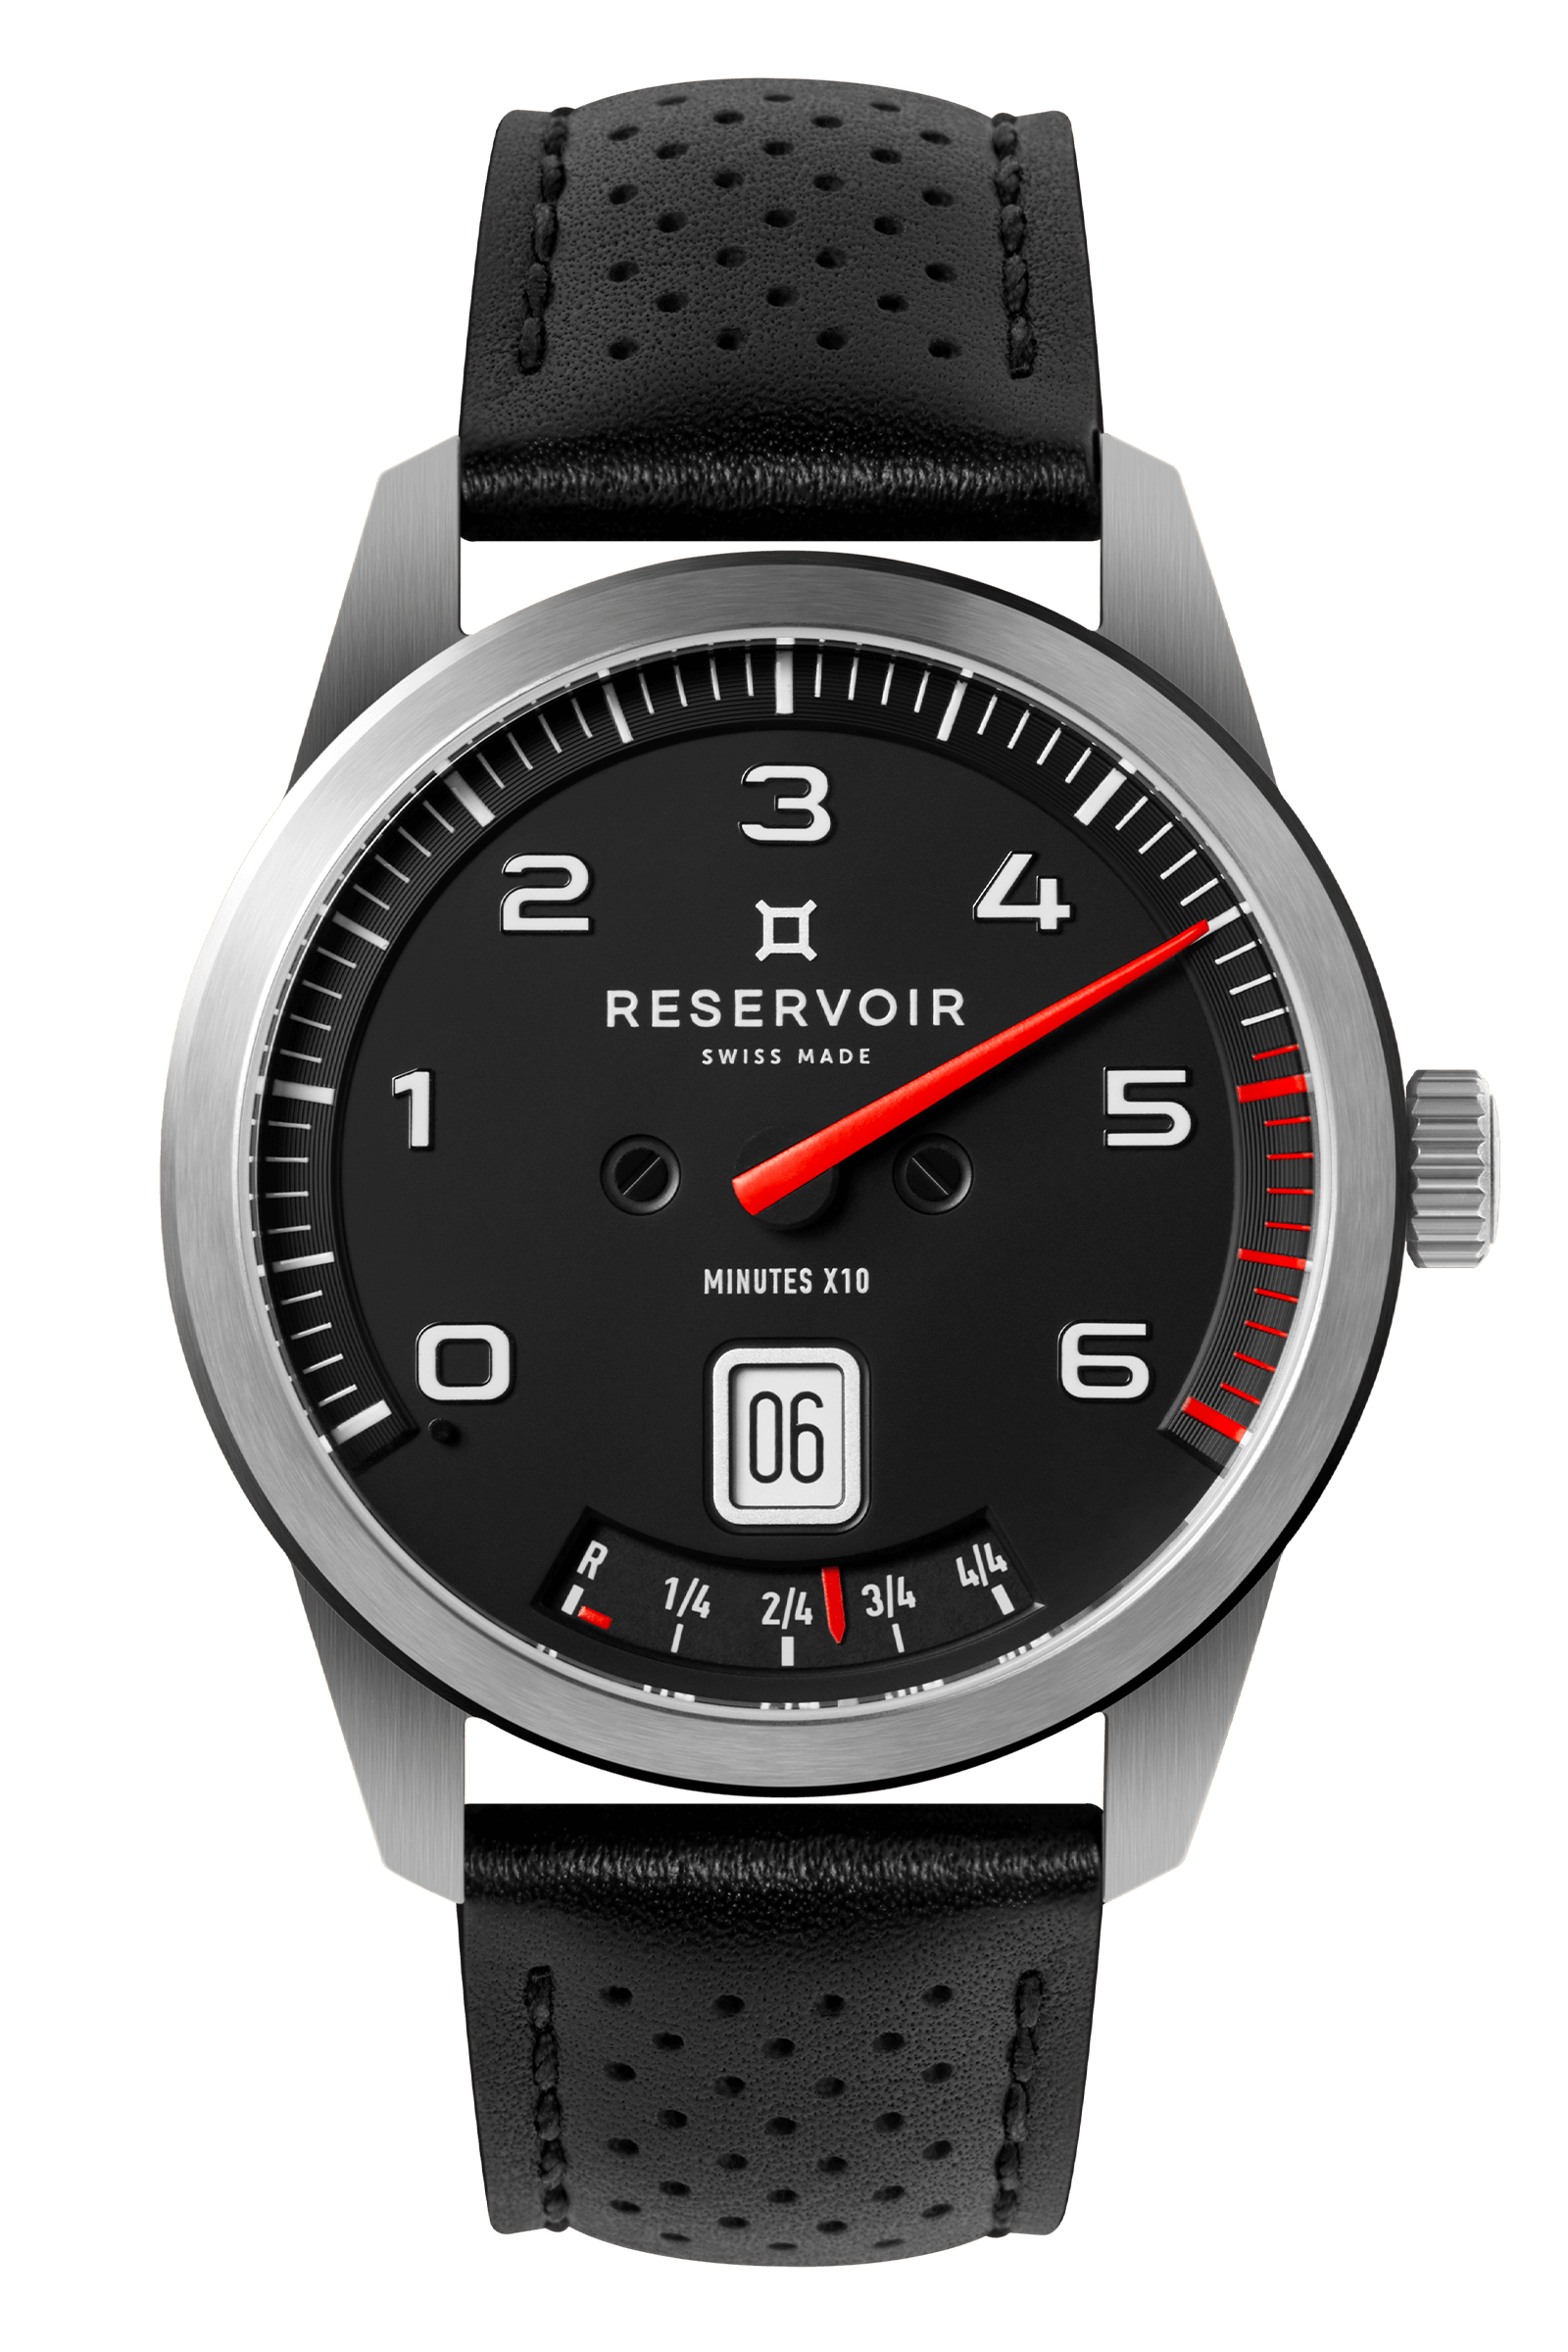 Jet Black GT Racing Car with Light Pink Speedometer and Light Grey-Brown Leather Strap.